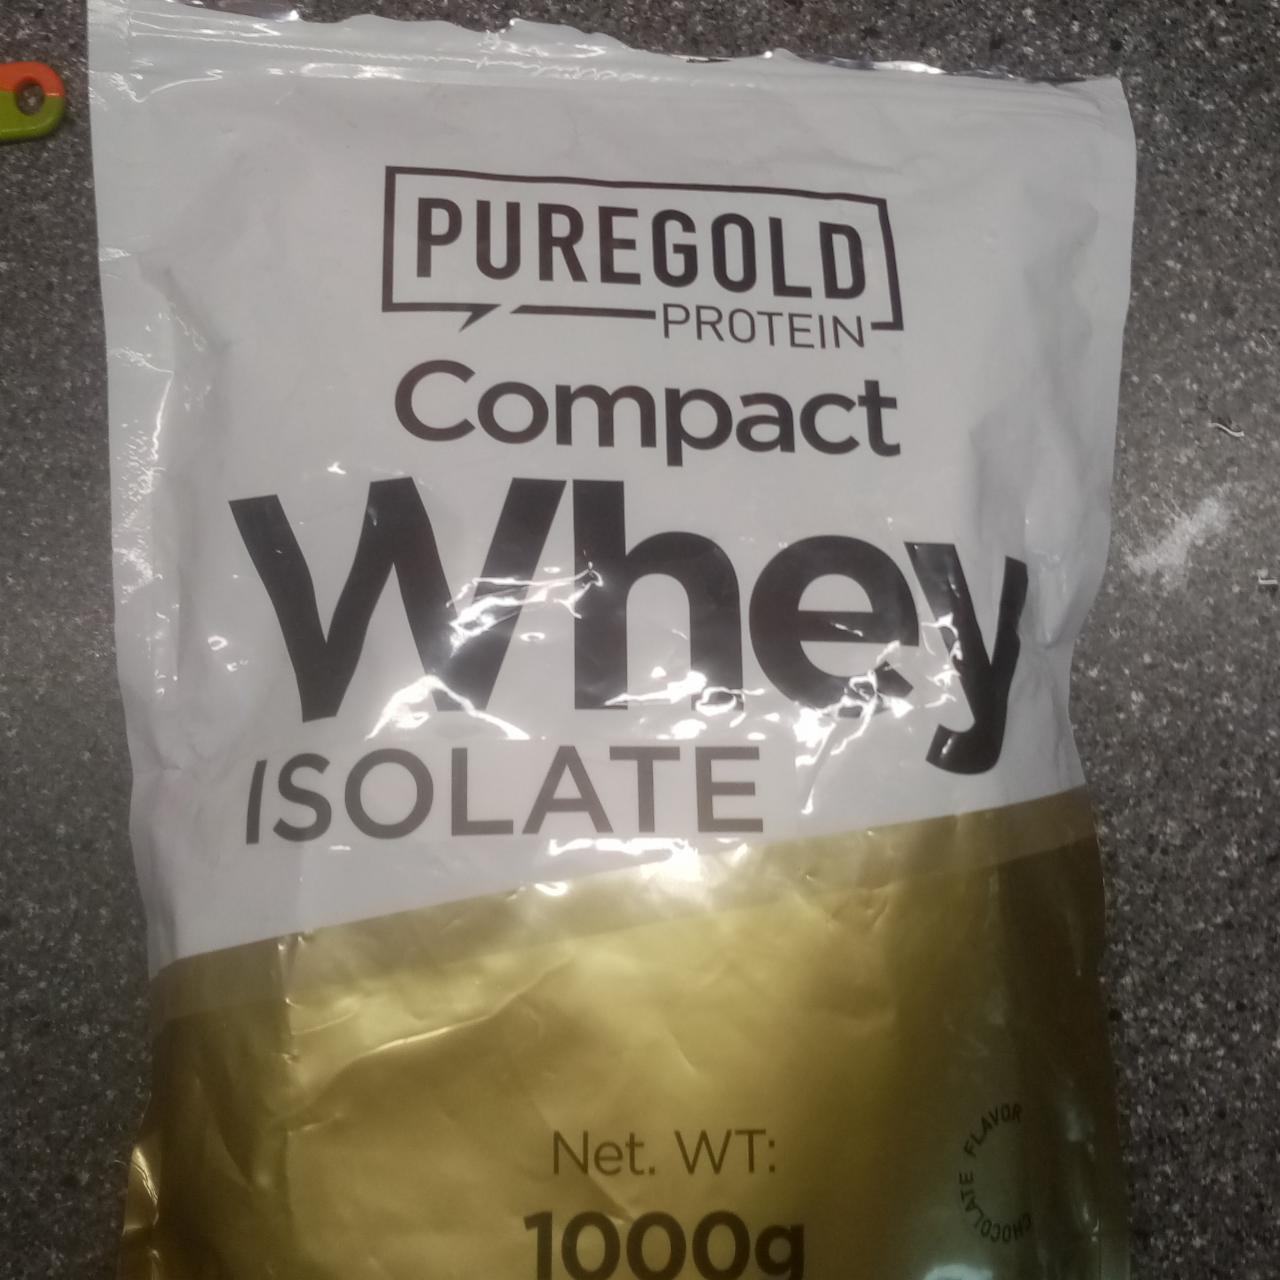 Фото - Compact Whey Isoate Puregold protein